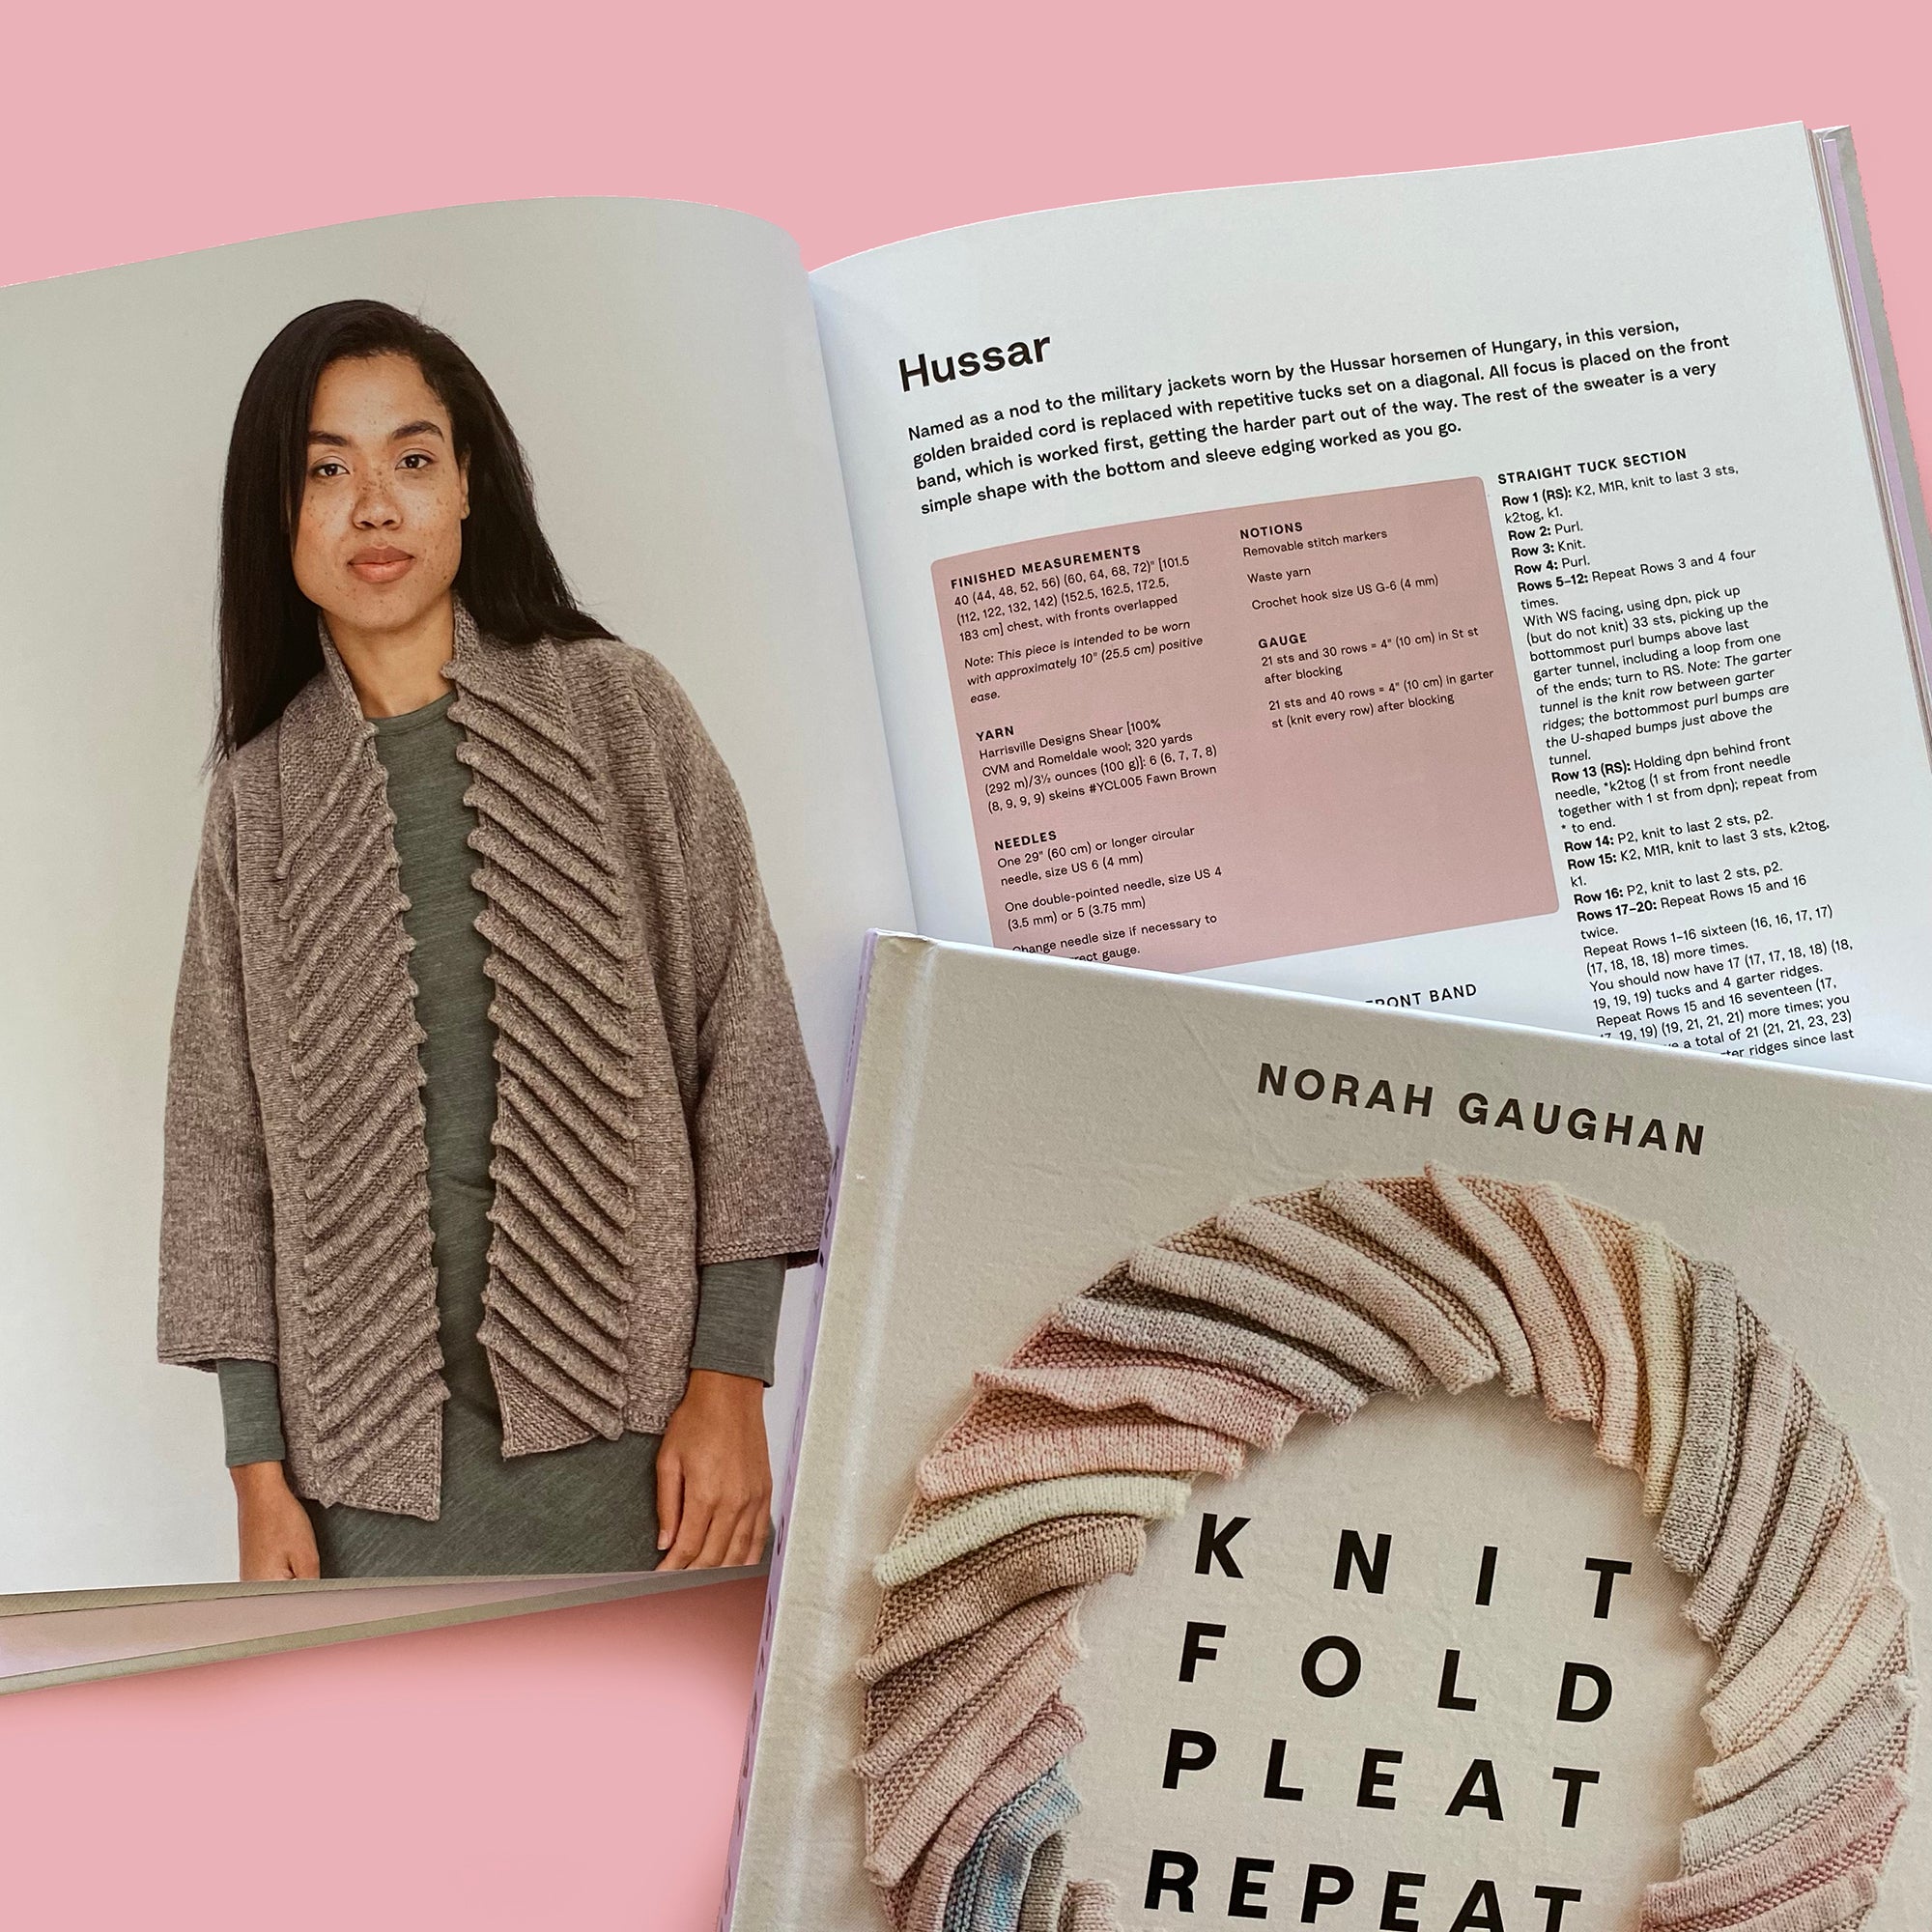 Have you any wool T shirts, As seen in Vogue Knitting magazine! - Firefly  Notes